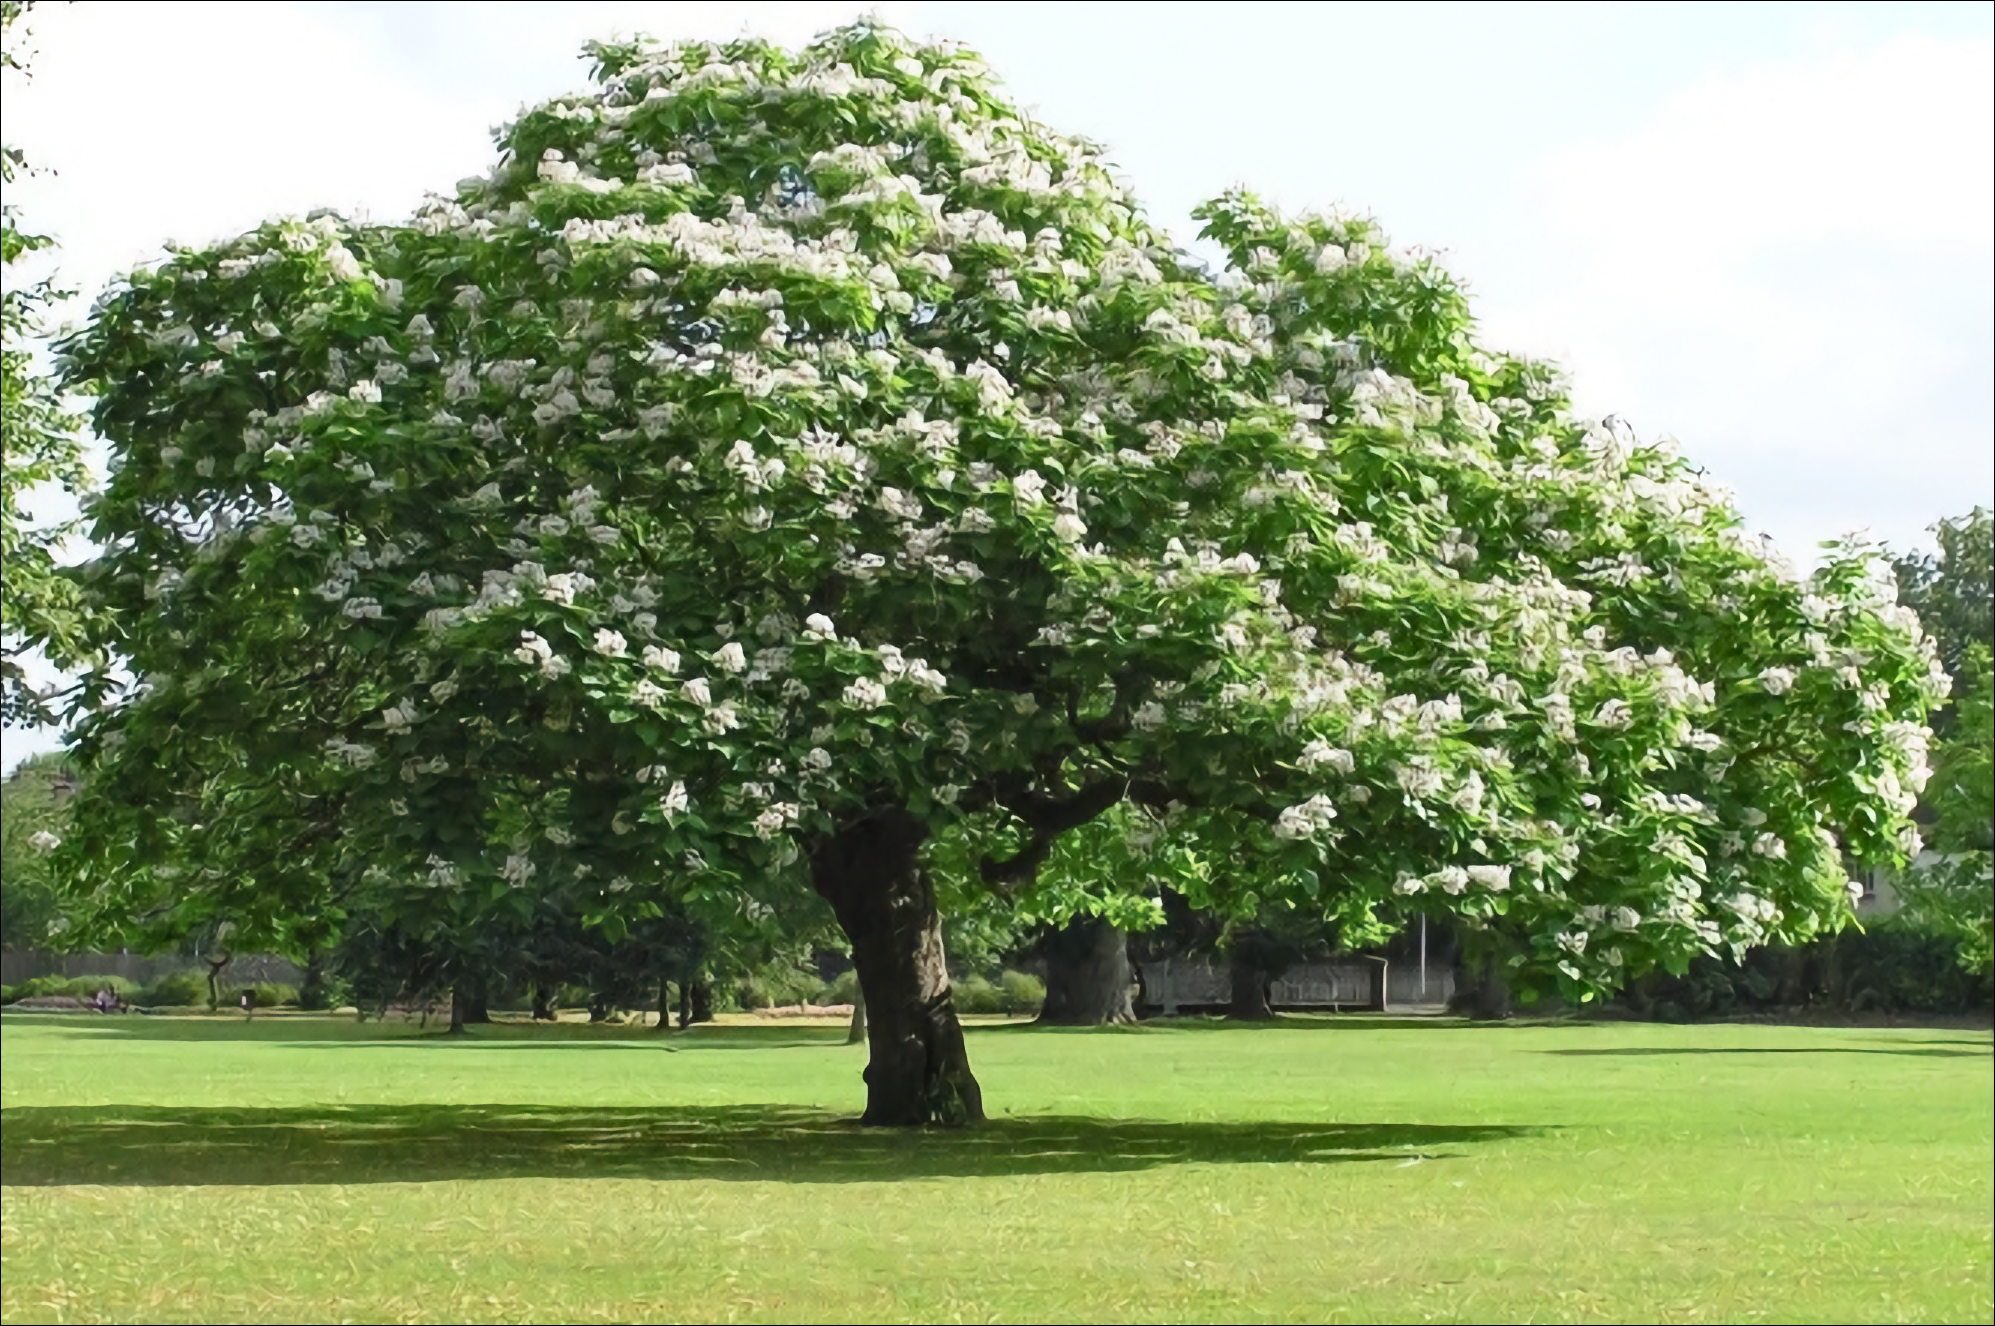 Photo of catalpa tree, with wide branches with blooming flowers, in grassy area